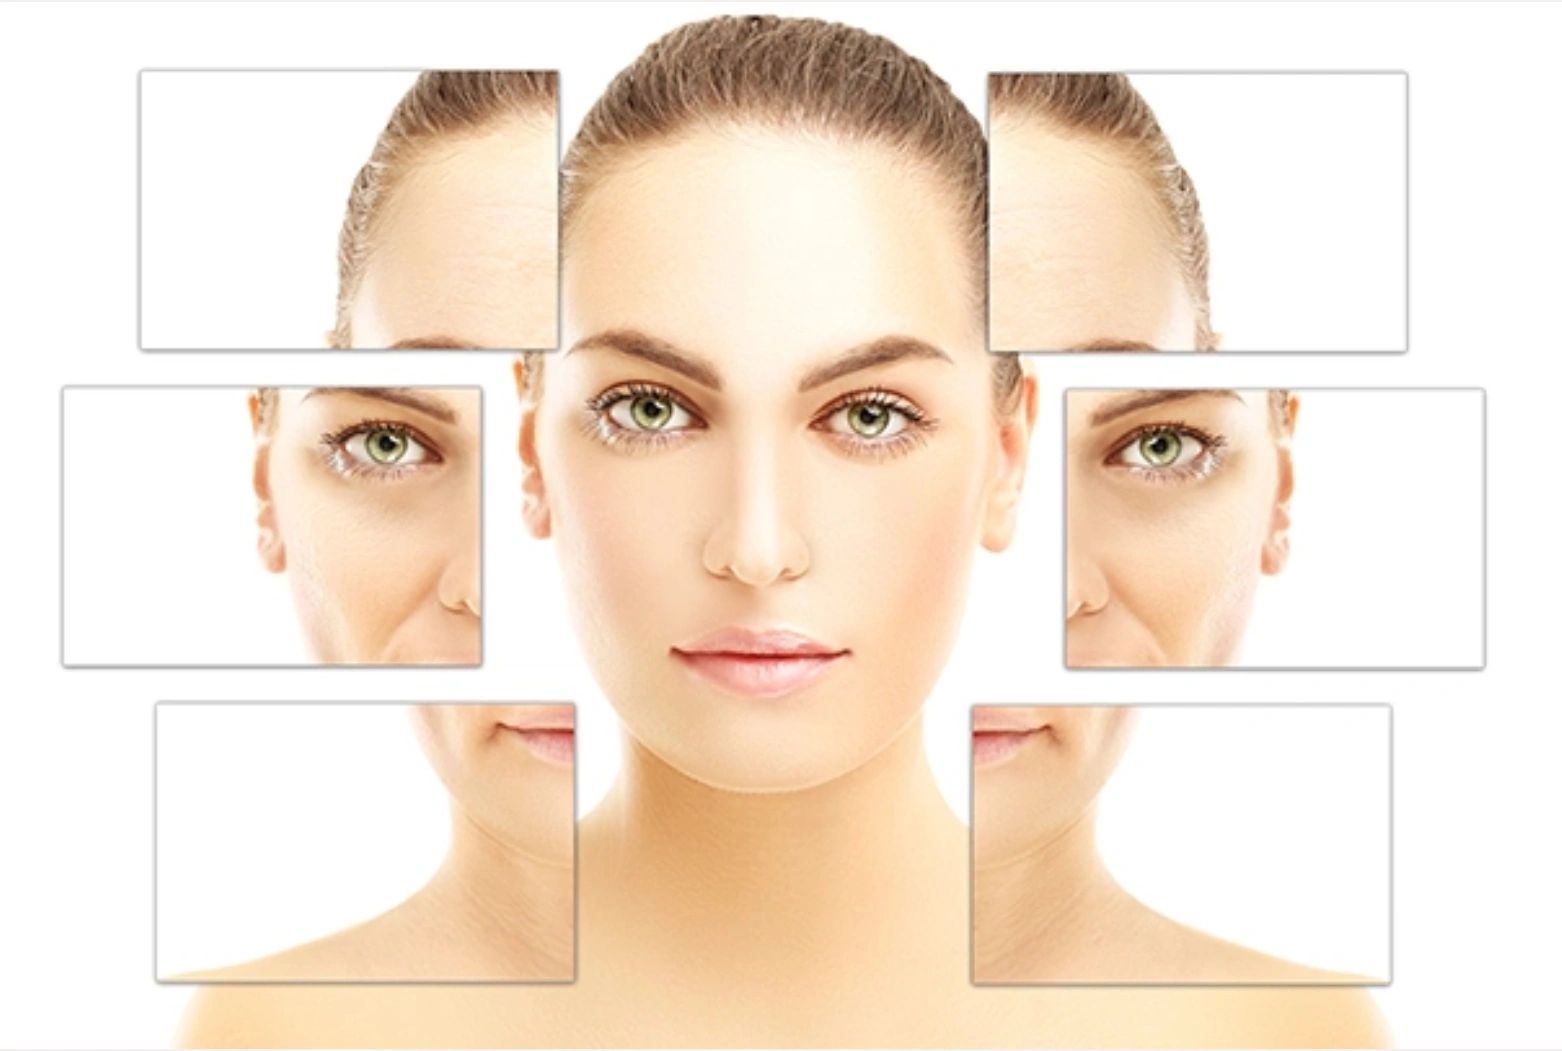 before and after image from the affects of skin tightening and anti aging treatments.